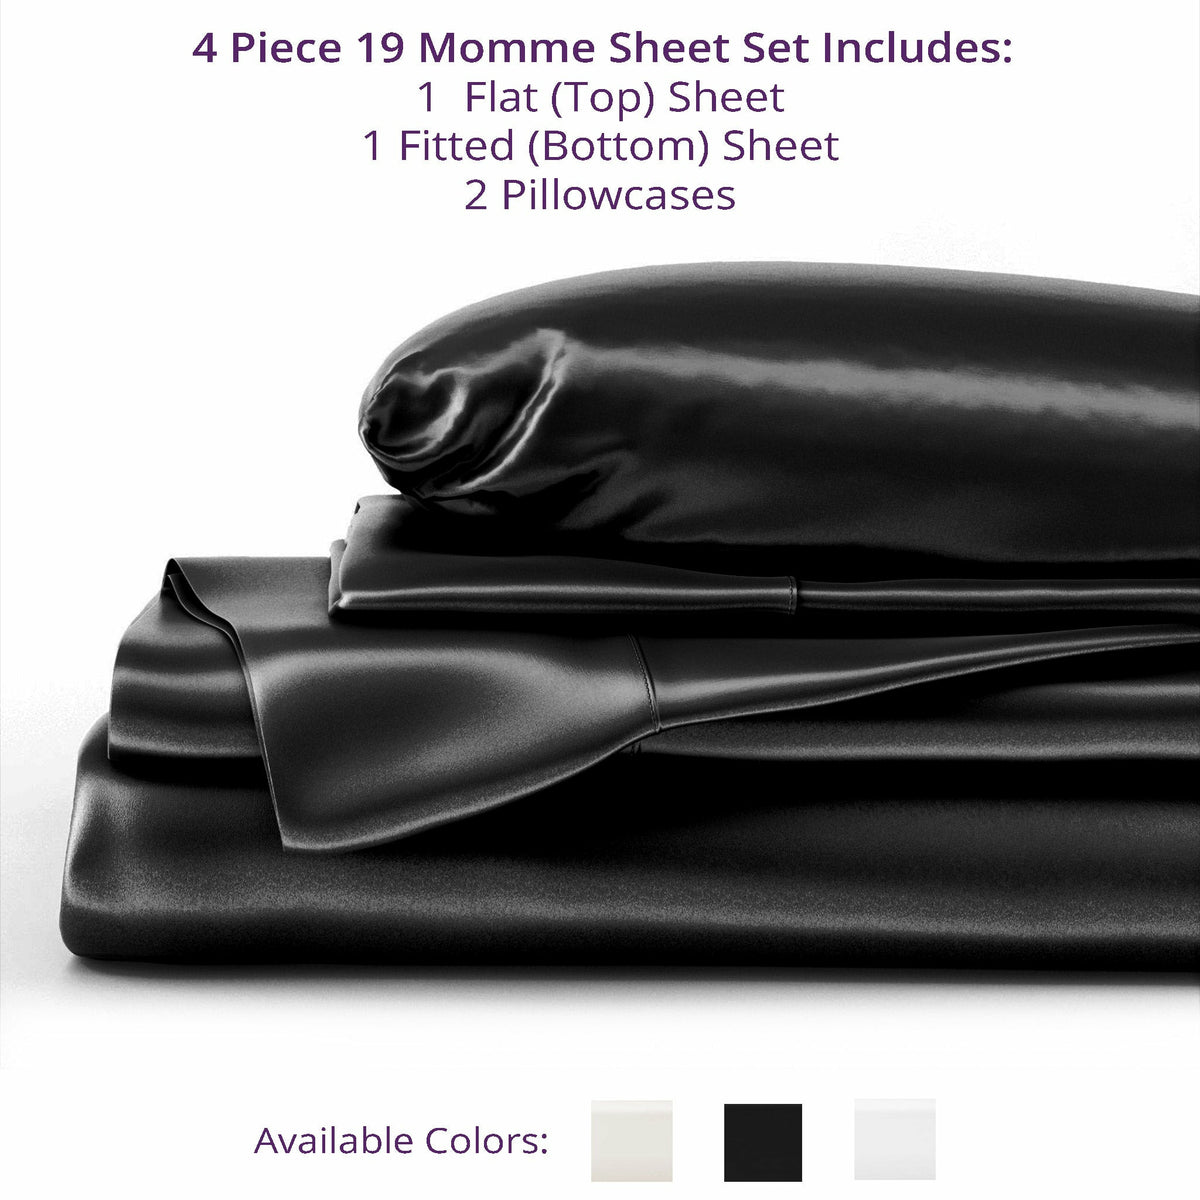 MPS Included in Sheet Set 19 Momme Black Fine Linens